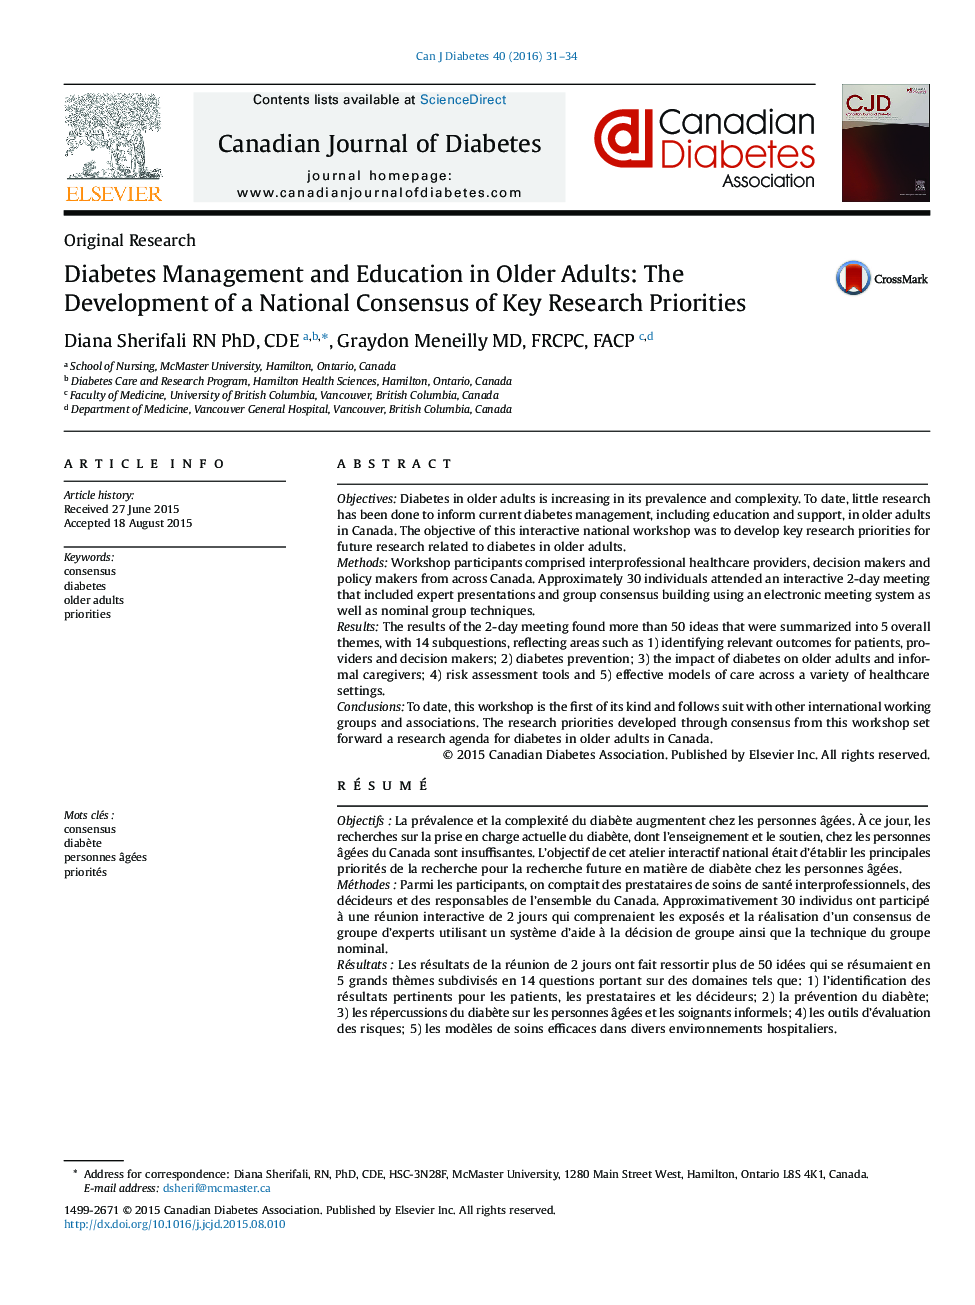 Diabetes Management and Education in Older Adults: The Development of a National Consensus of Key Research Priorities